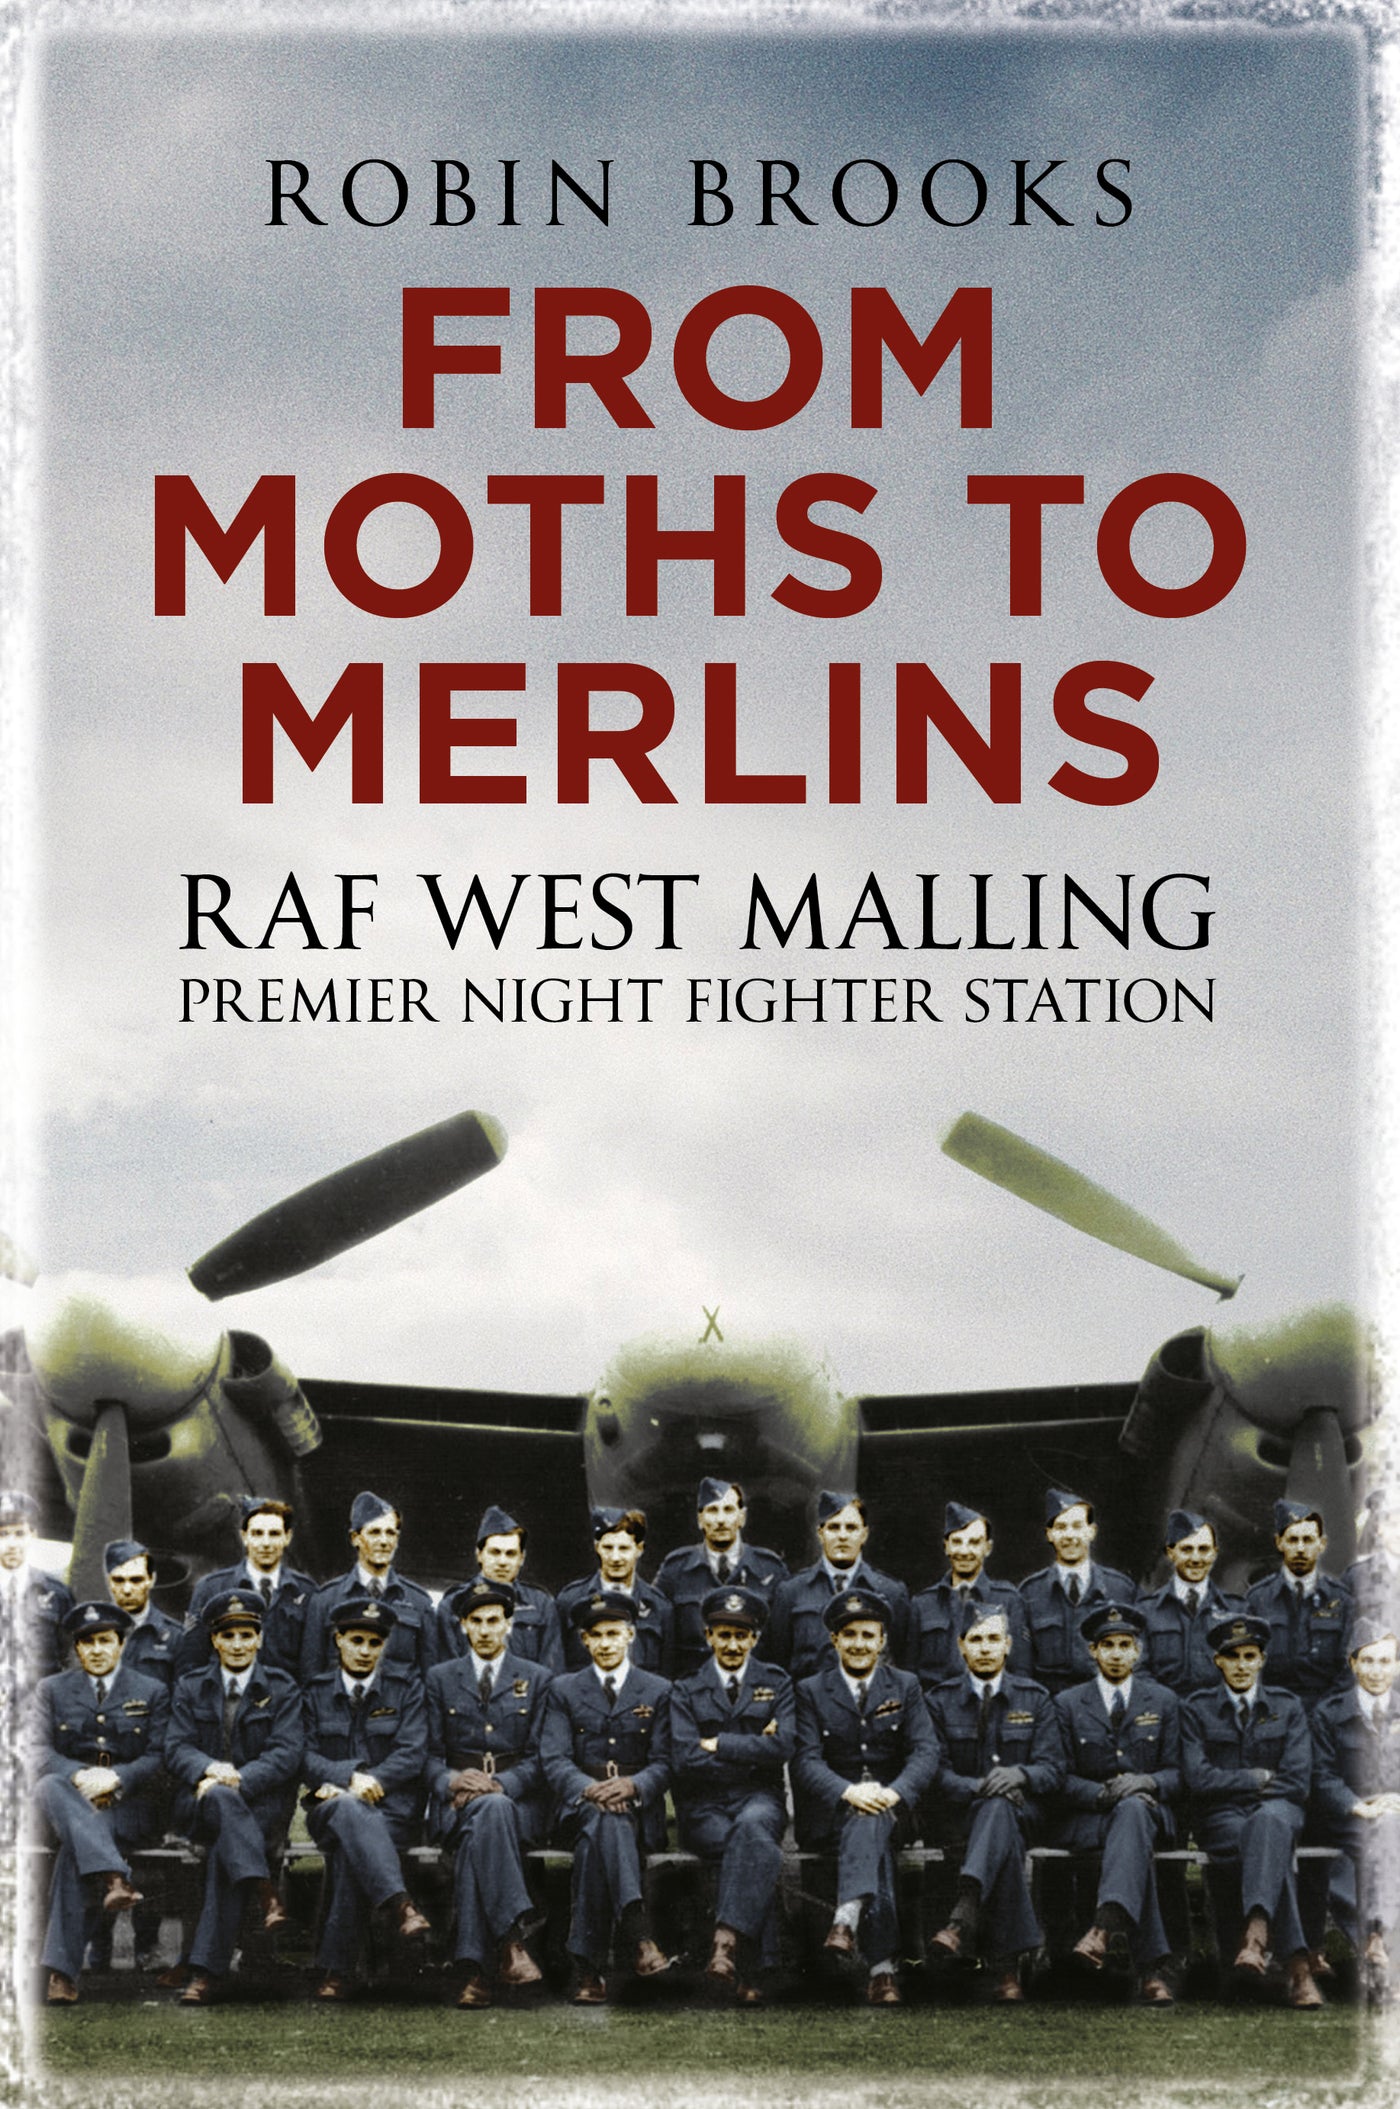 From Moths to Merlins